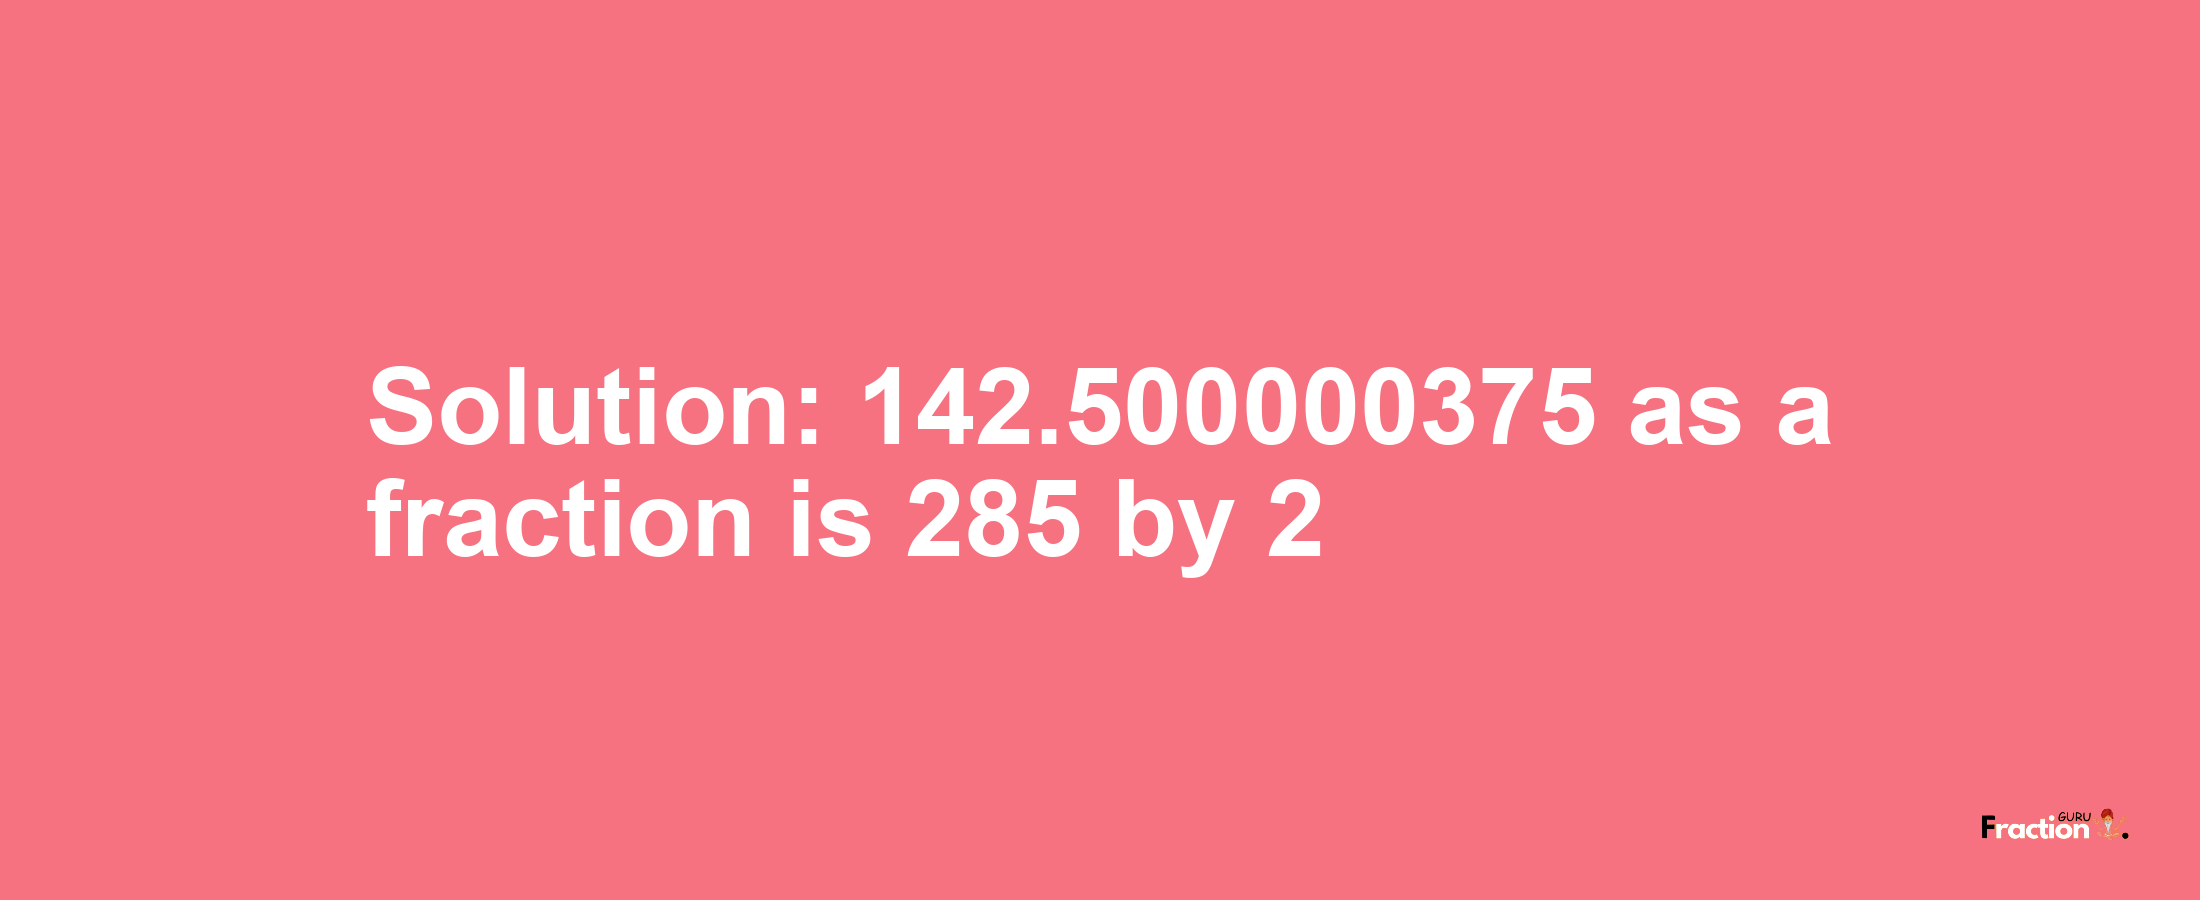 Solution:142.500000375 as a fraction is 285/2